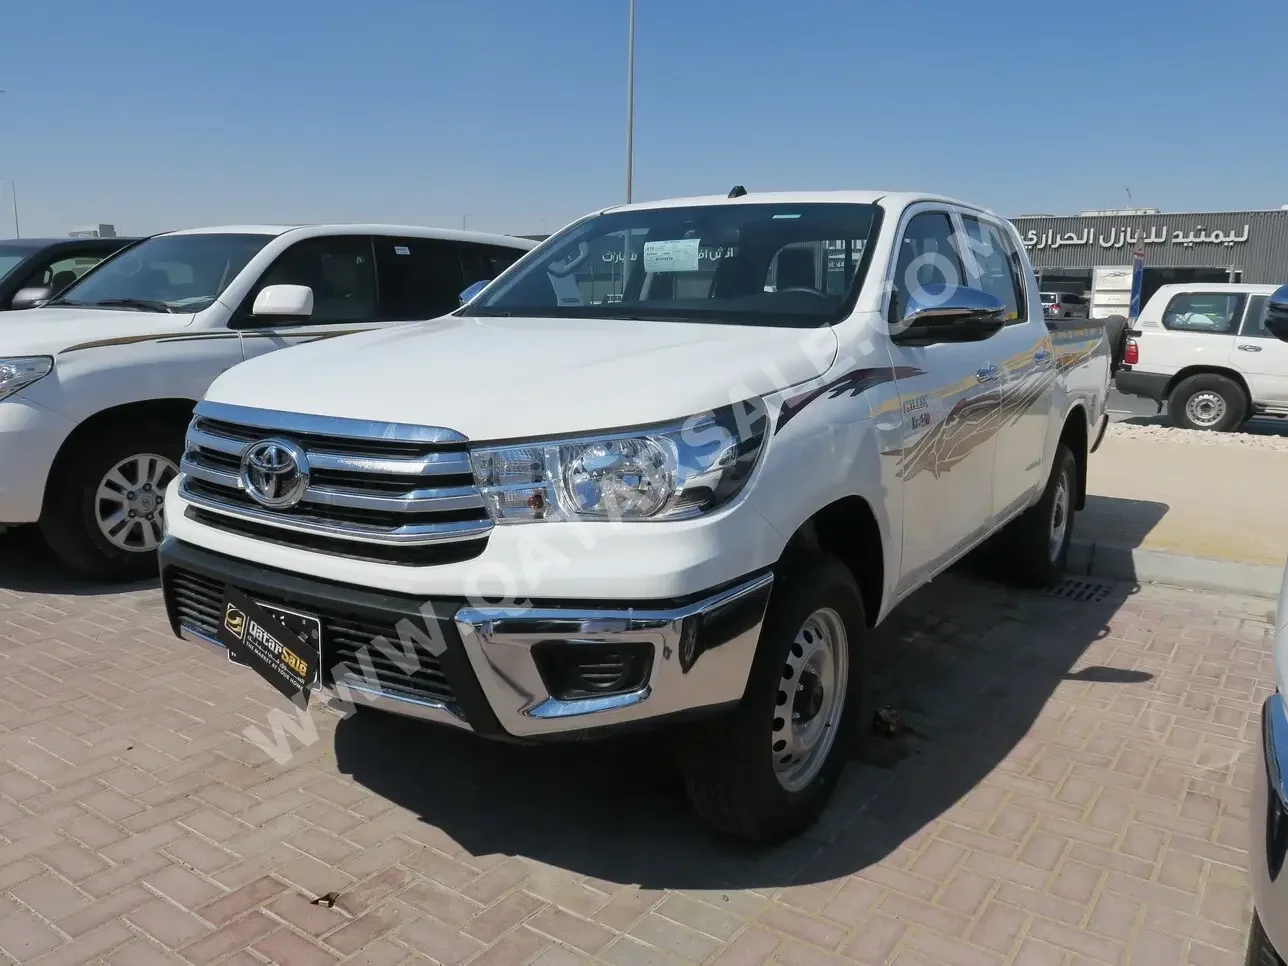 Toyota  Hilux  SR5  2024  Manual  0 Km  4 Cylinder  Four Wheel Drive (4WD)  Pick Up  White  With Warranty